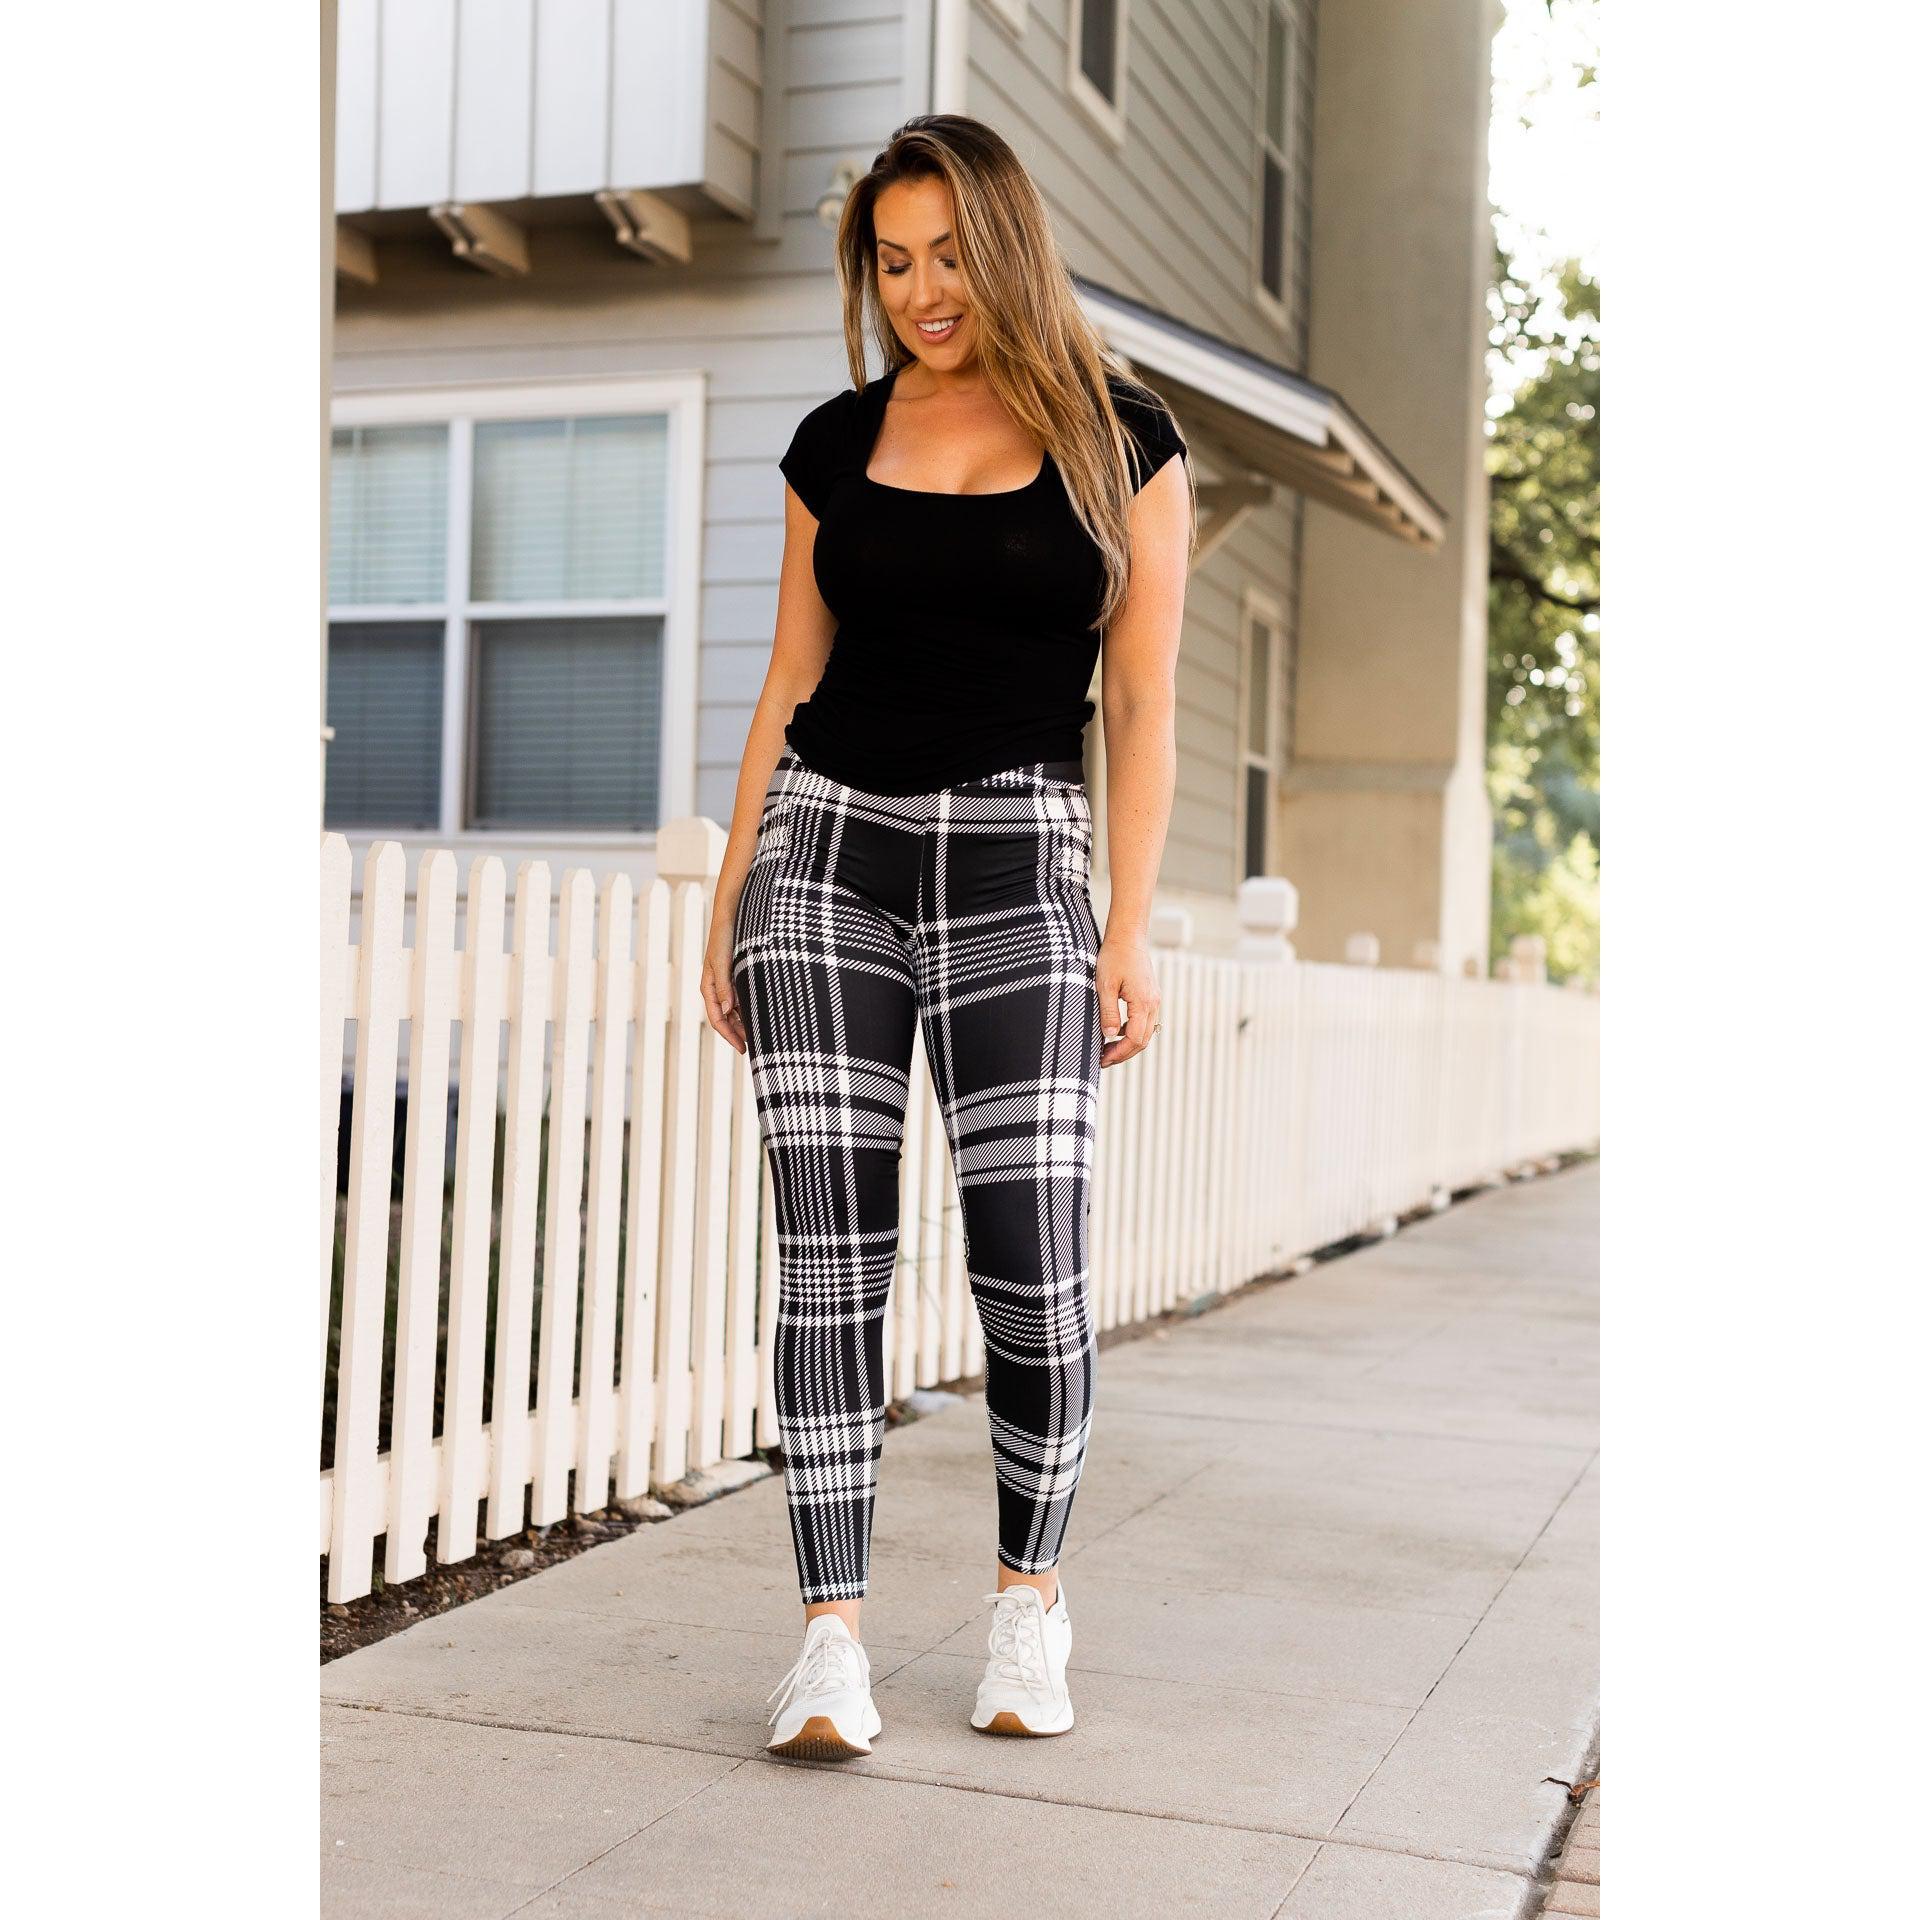 Leggings | Lillo Bella-Women's Clothing, Unique Shoes, Jewelry & Gifts